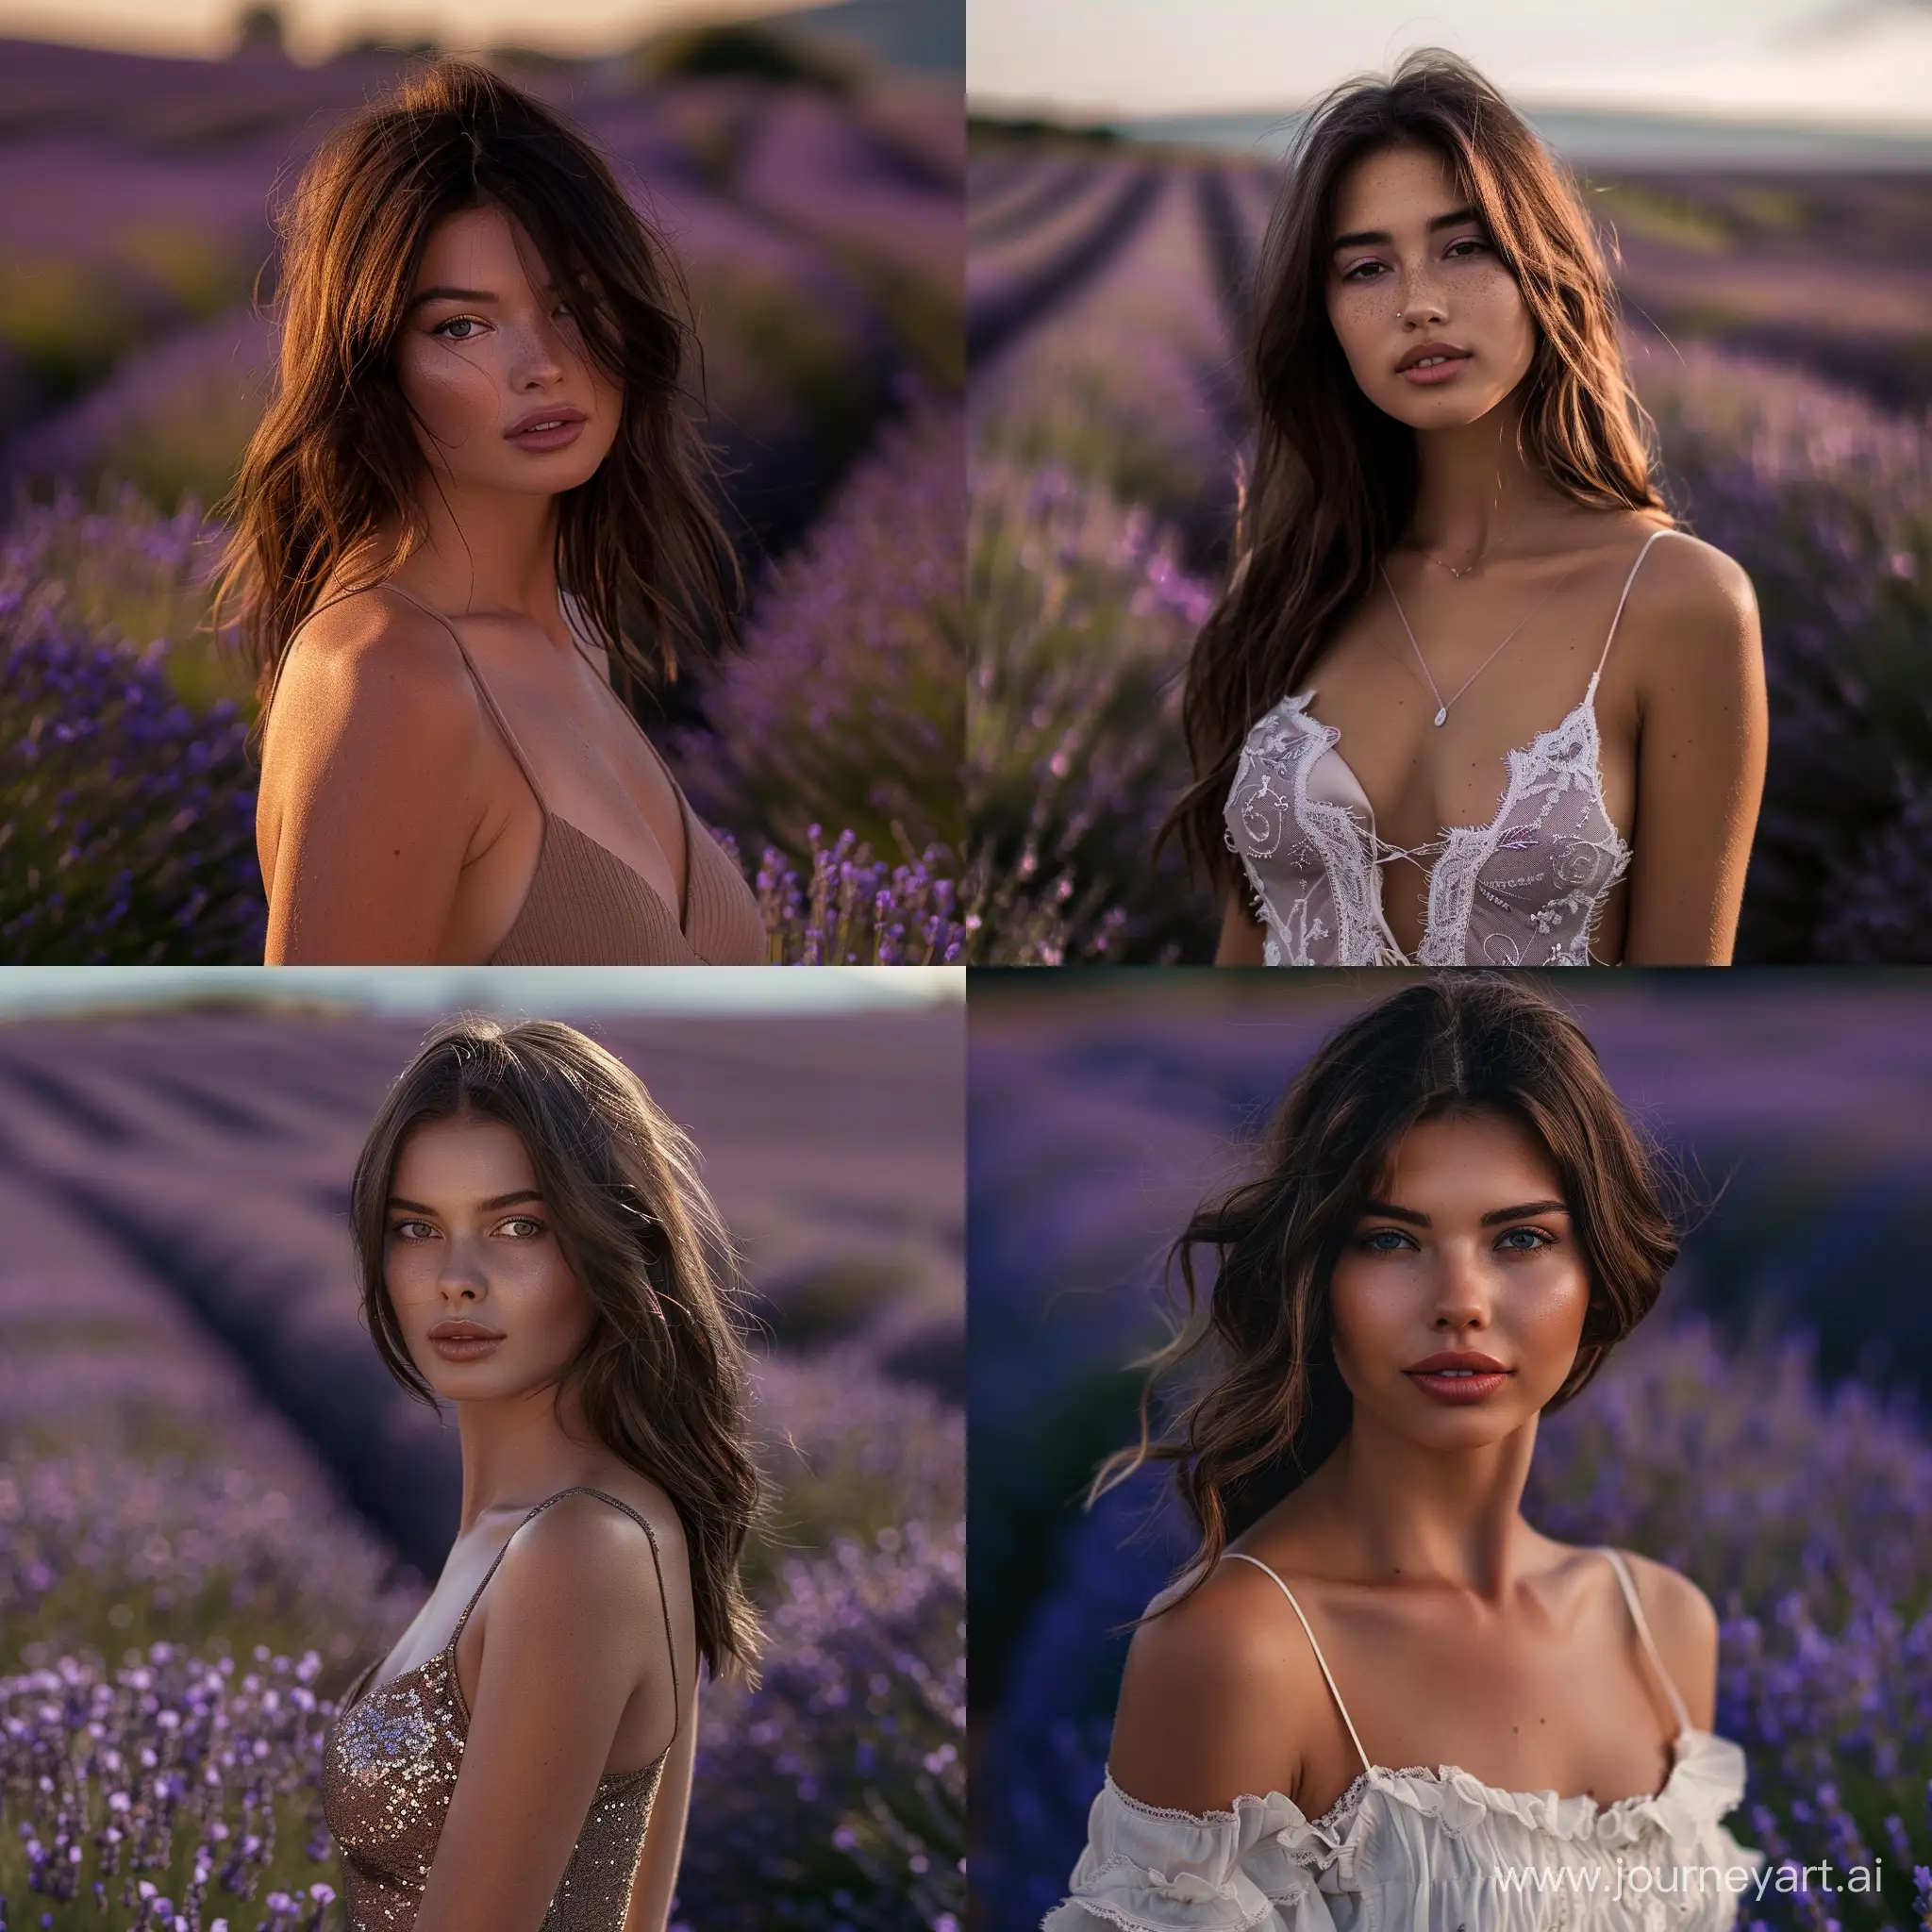 Graceful-Brunette-Model-in-Lavender-Field-with-Hourglass-Silhouette